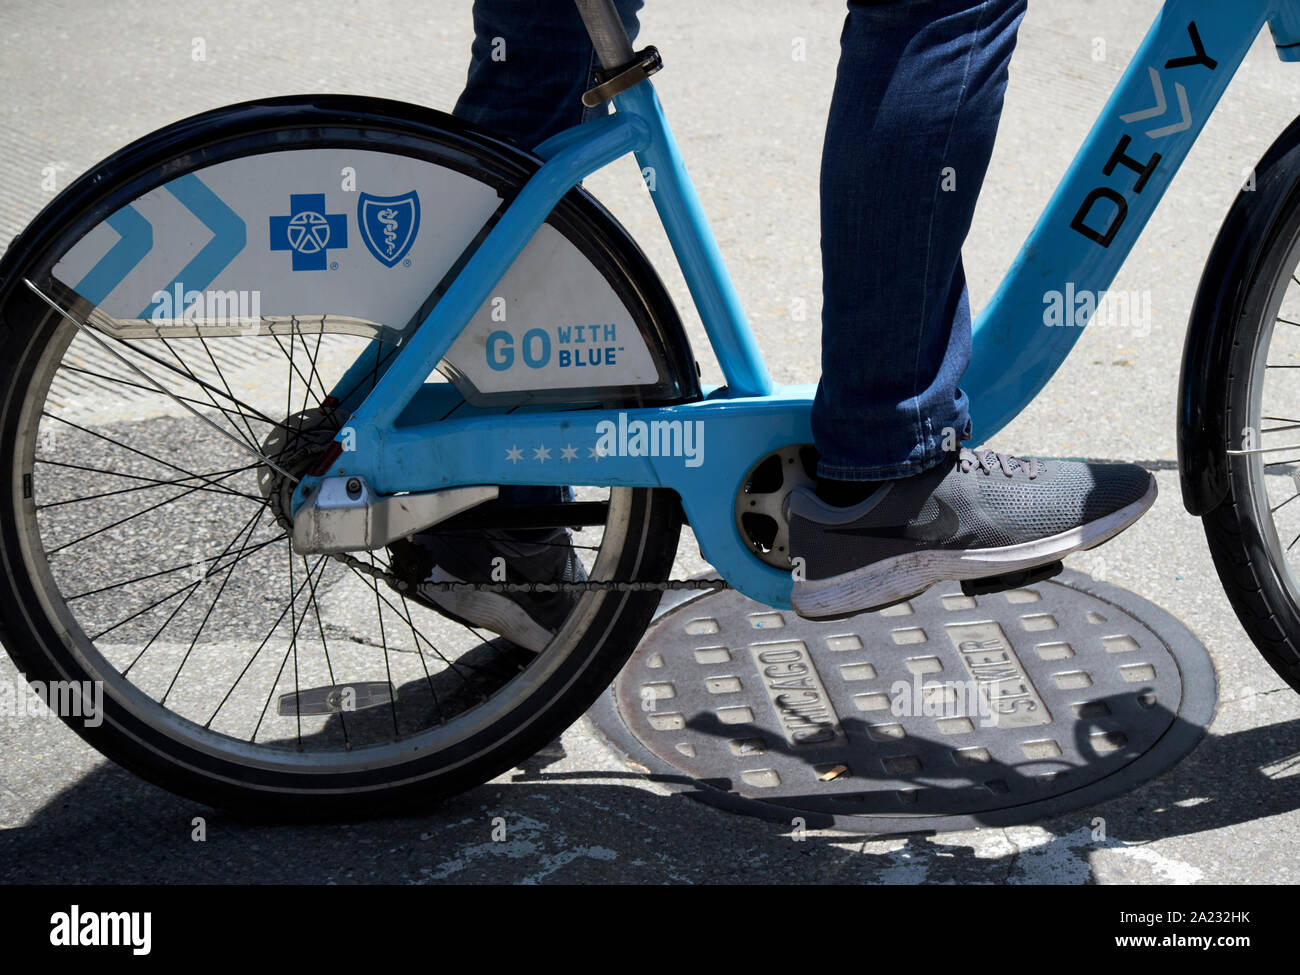 man riding blue chicago divvy rental bike in downtown chicago illinois united states of america Stock Photo